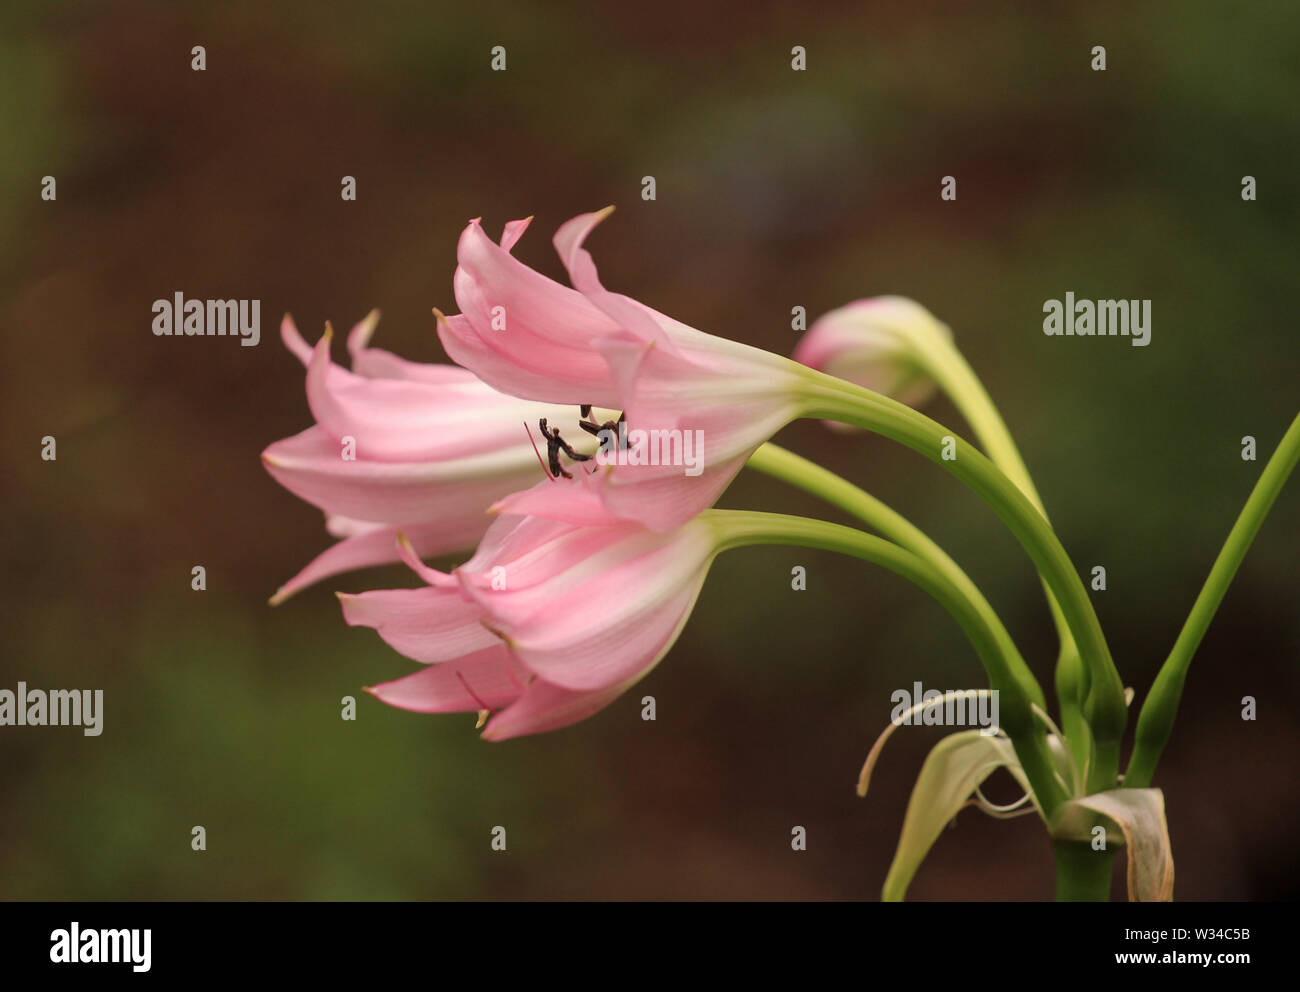 Flowers of Crinum sp. plant in a botanical garden Stock Photo